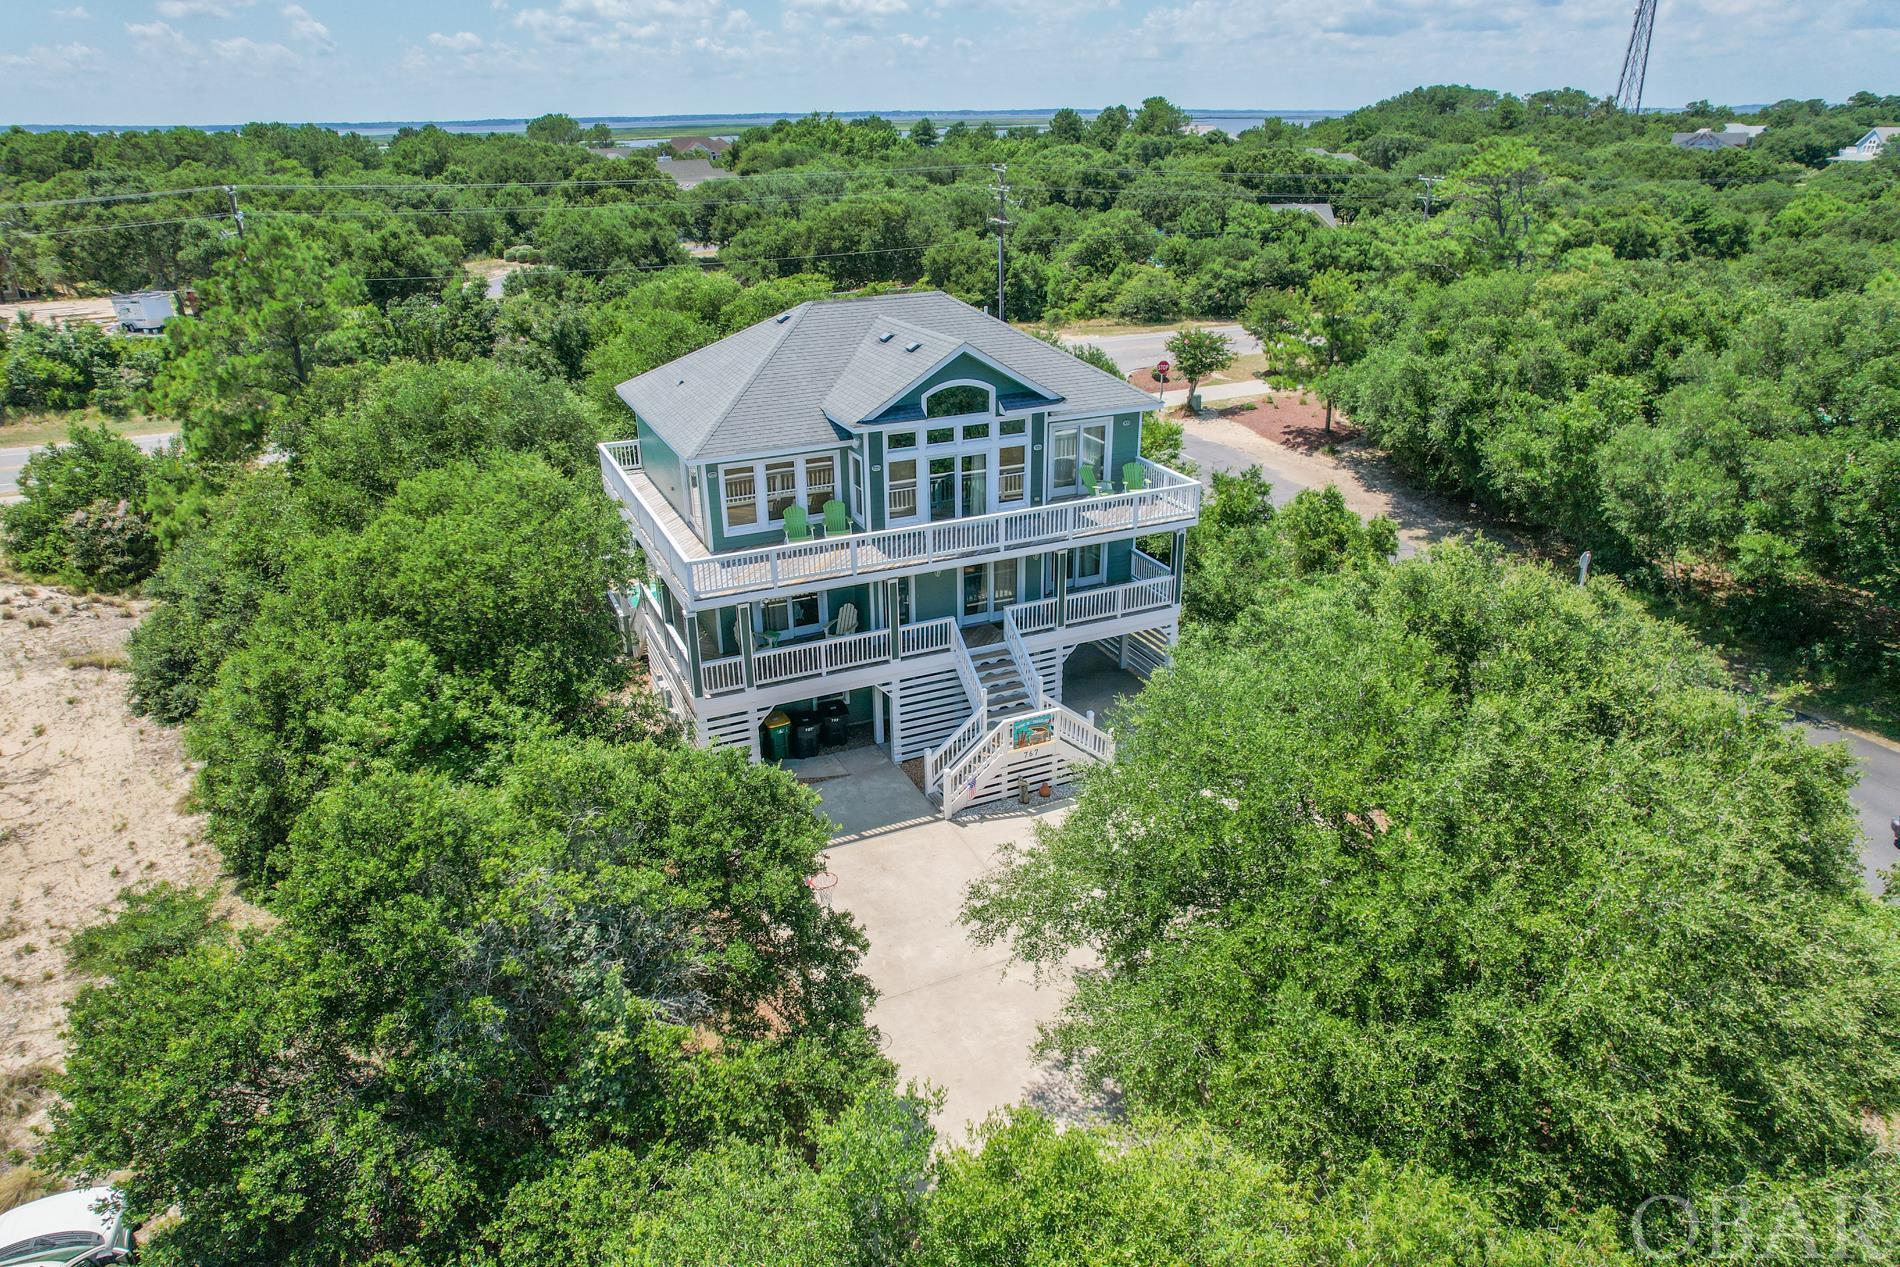 767 Gulfstream Court, Corolla, NC 27927, 7 Bedrooms Bedrooms, ,6 BathroomsBathrooms,Residential,For sale,Gulfstream Court,125031